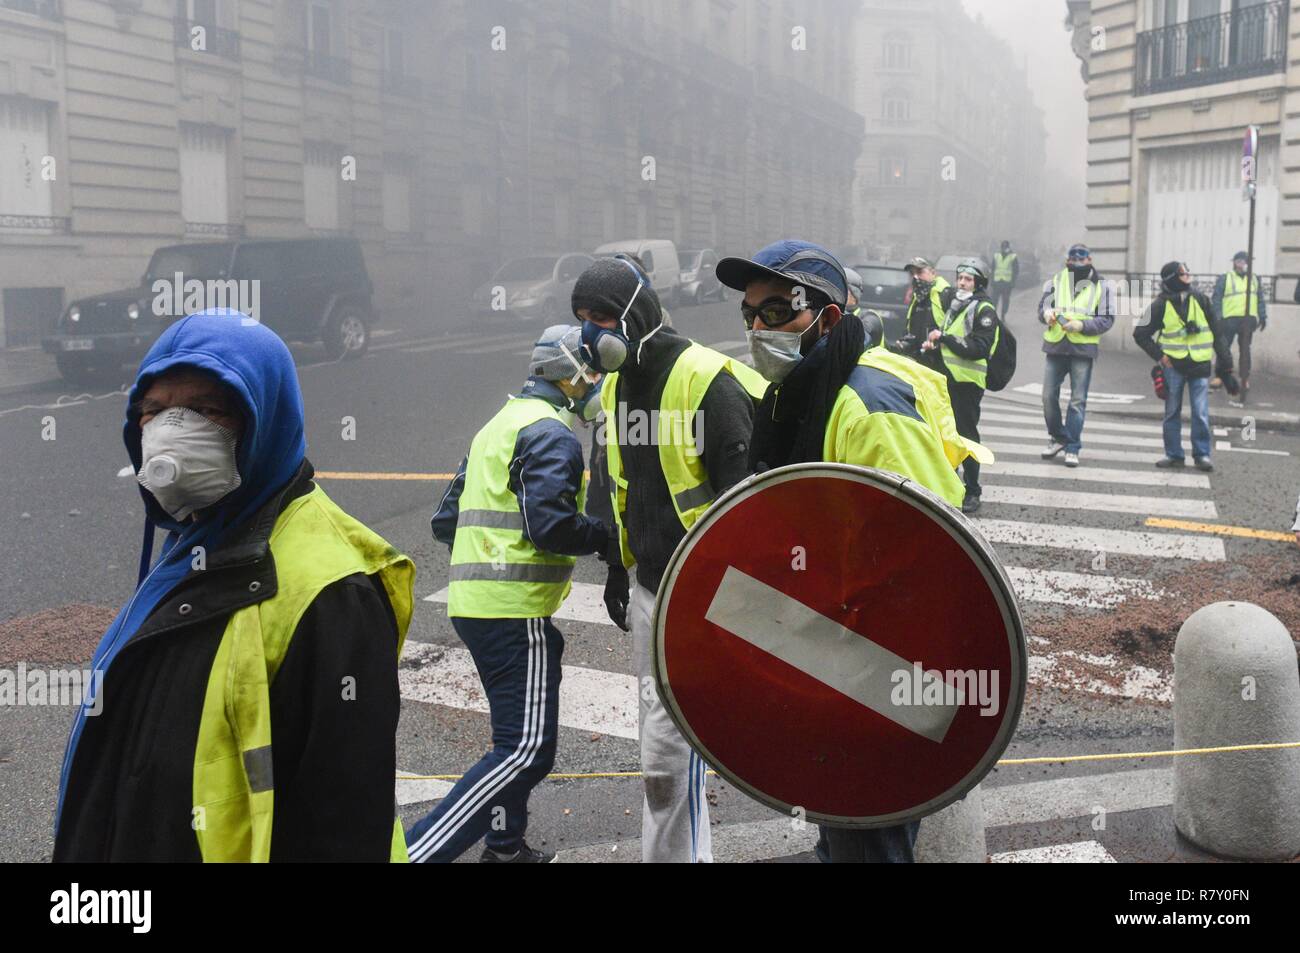 December 01, 2018 - Paris, France: A Yellow vest protester uses a road sign  as a shield in a side street near the Champs-Elysees avenue, where several  vehicles were burnt. Protesters clashed